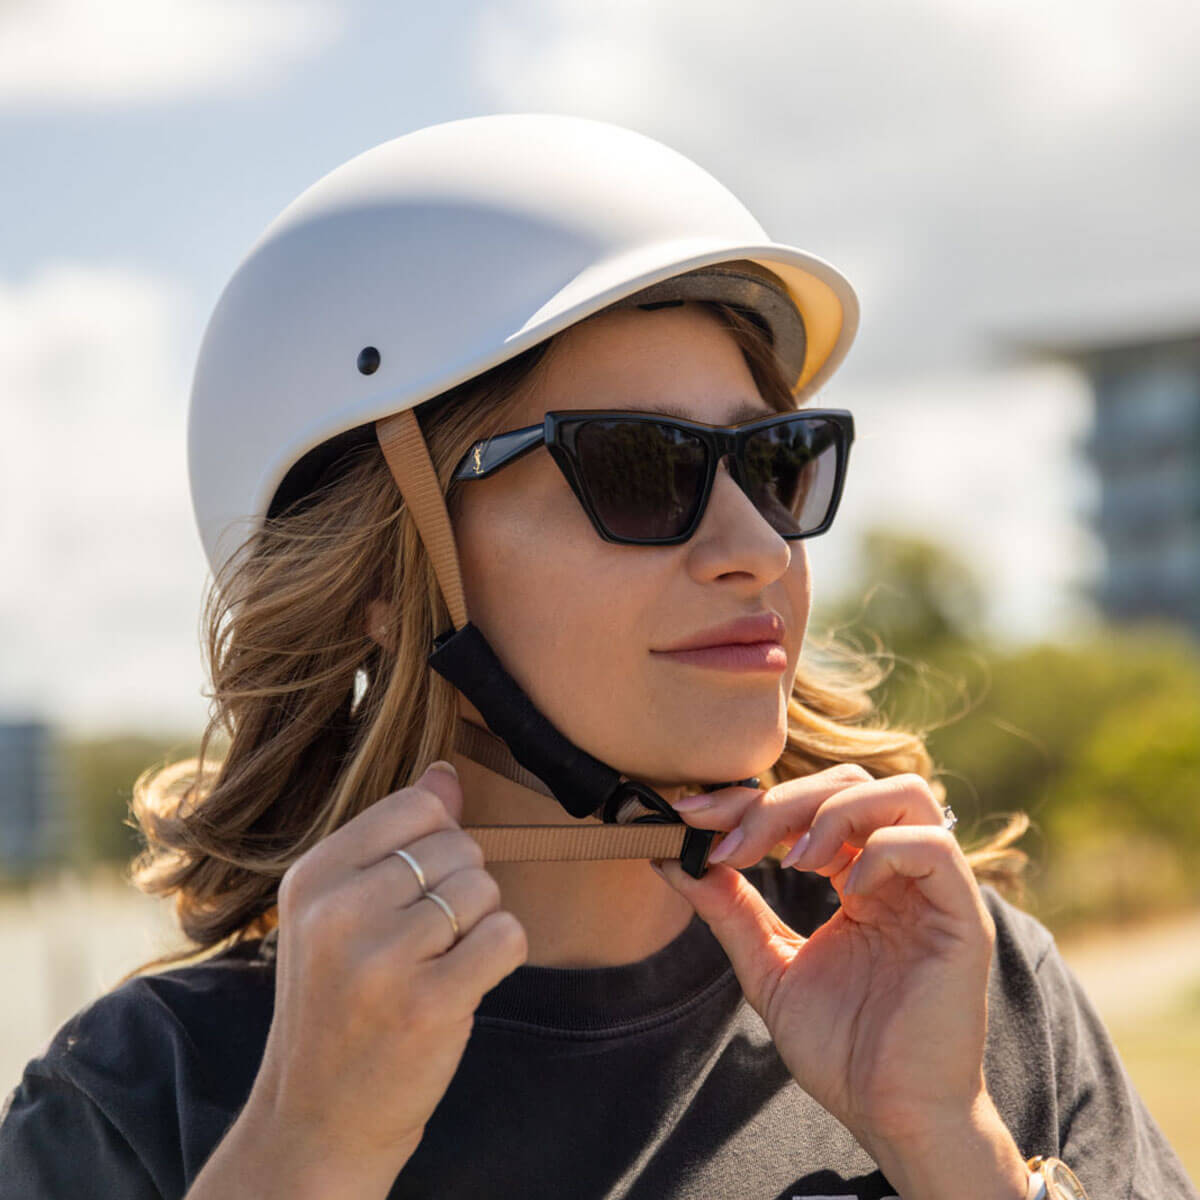 GlideGuard Helmet for Electric Scooter